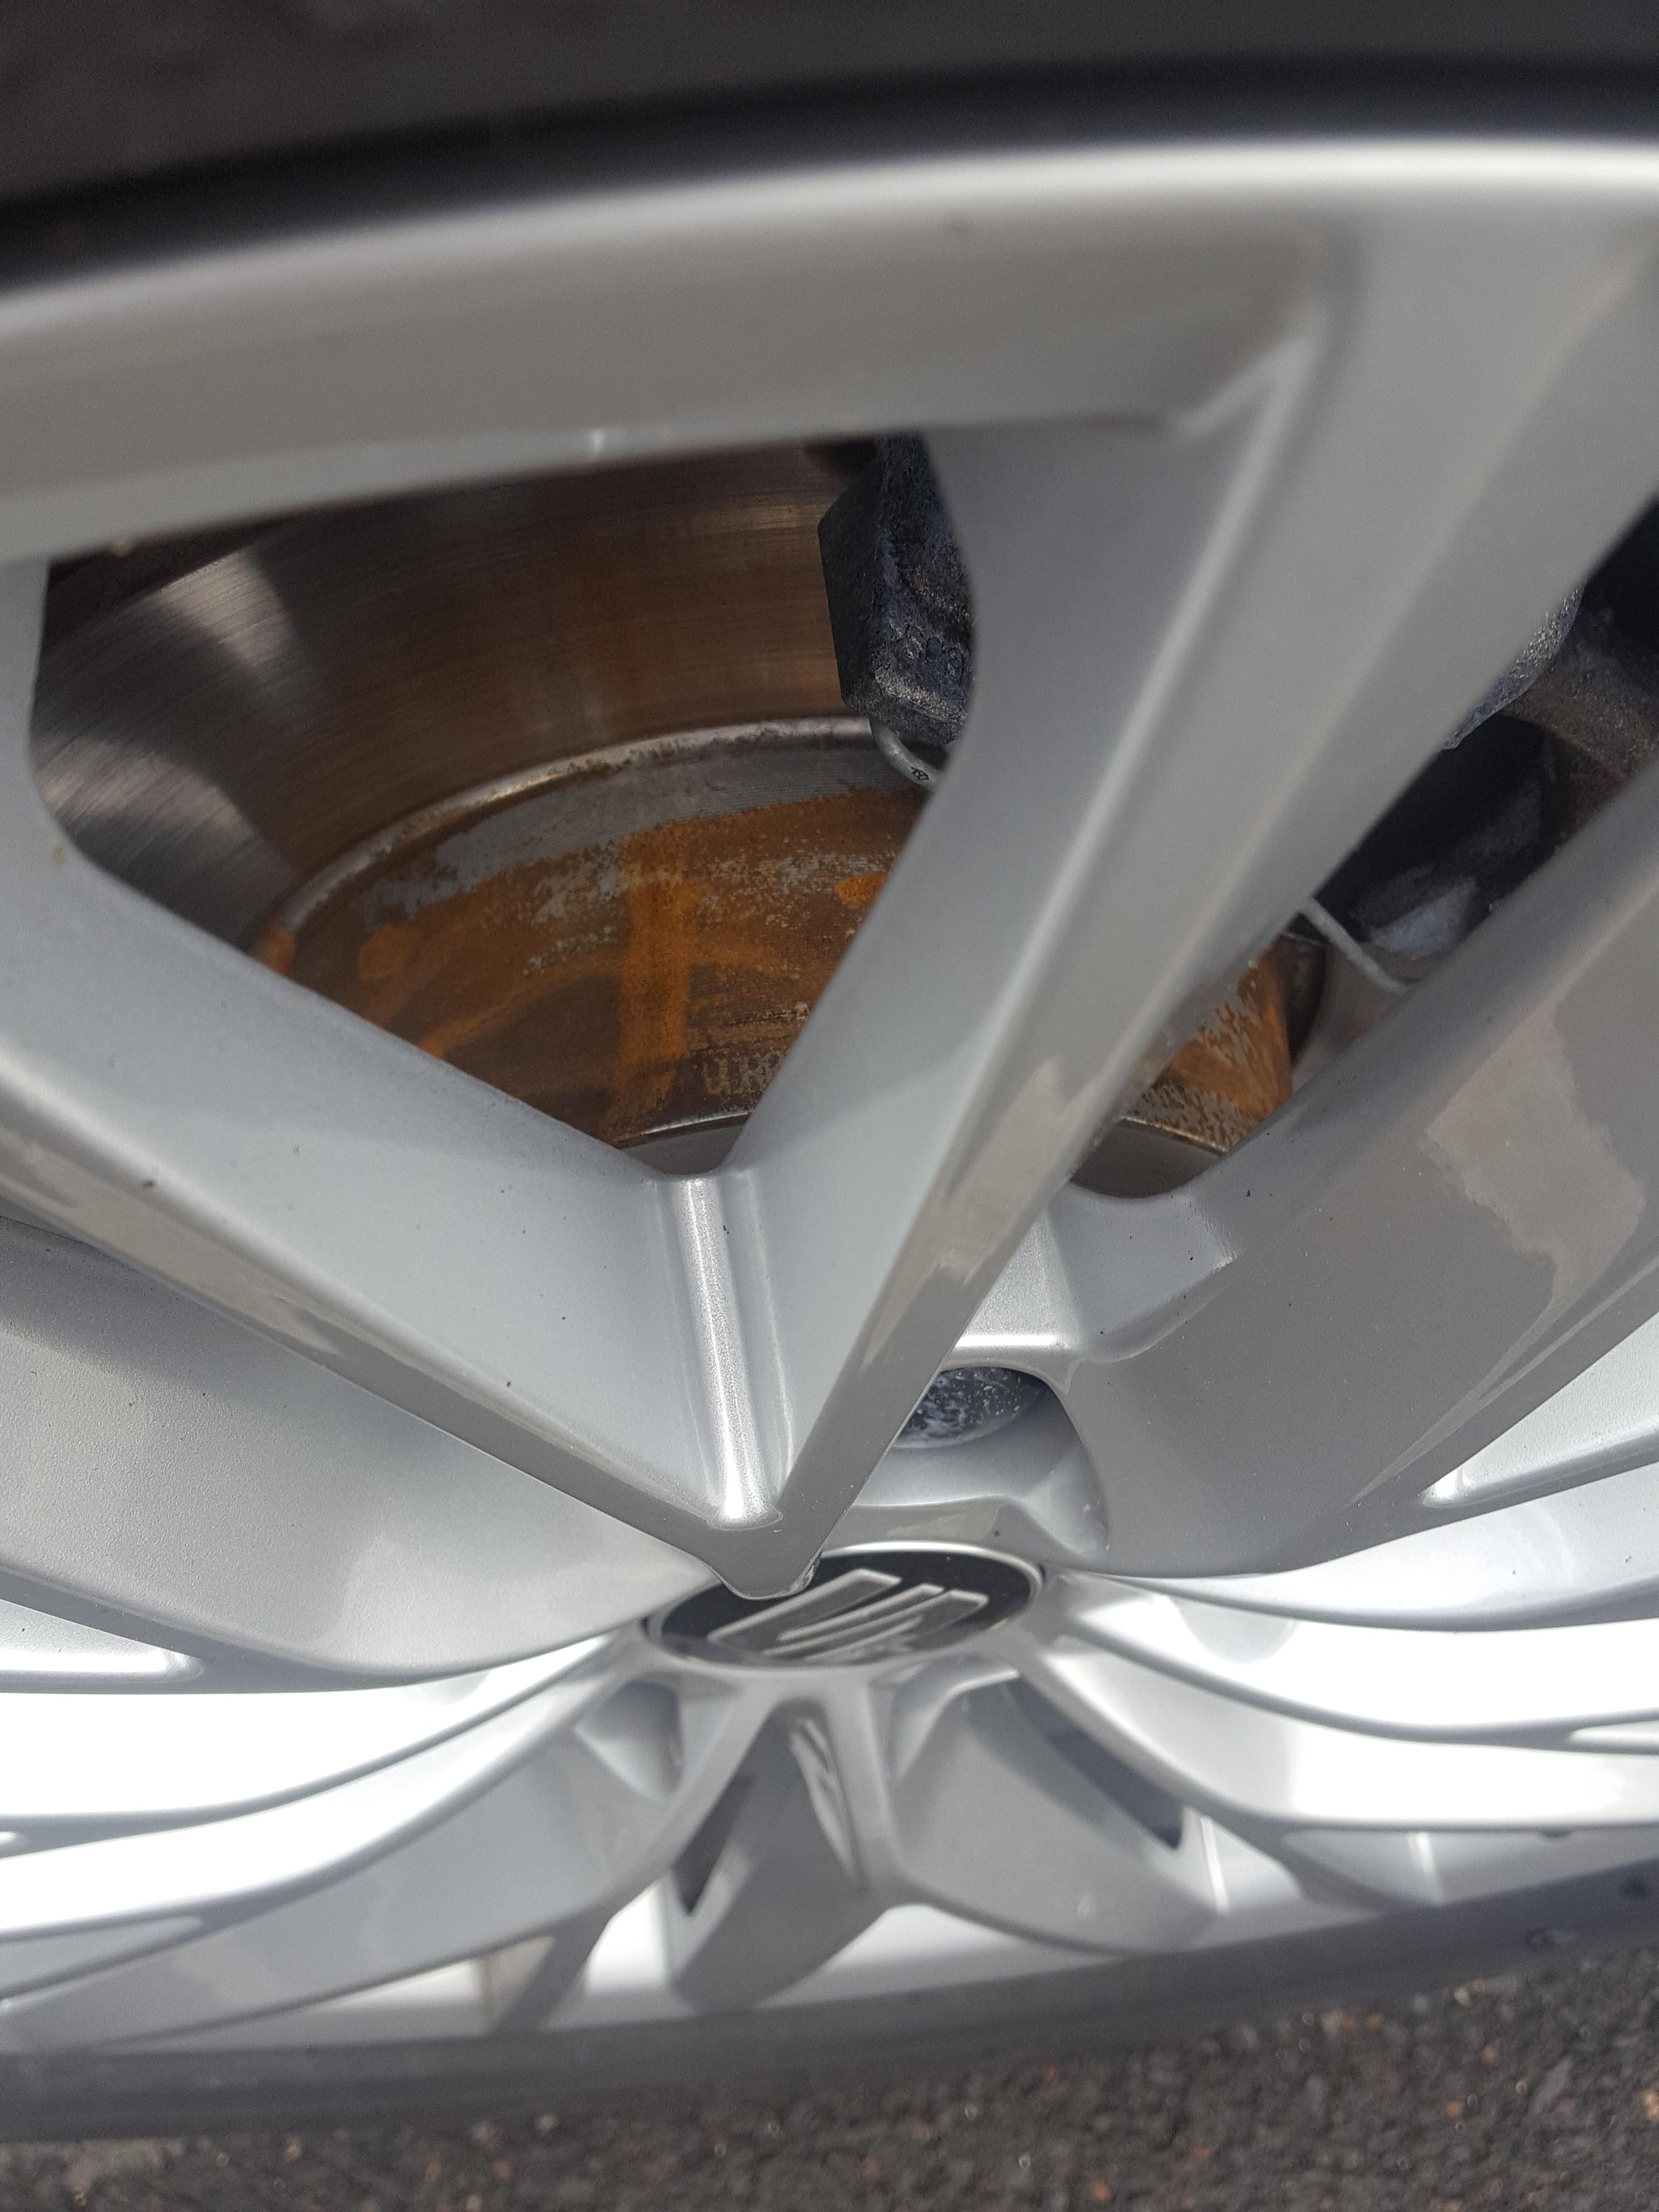 Rust on the inside of alloy wheel - Seat Ateca Forums